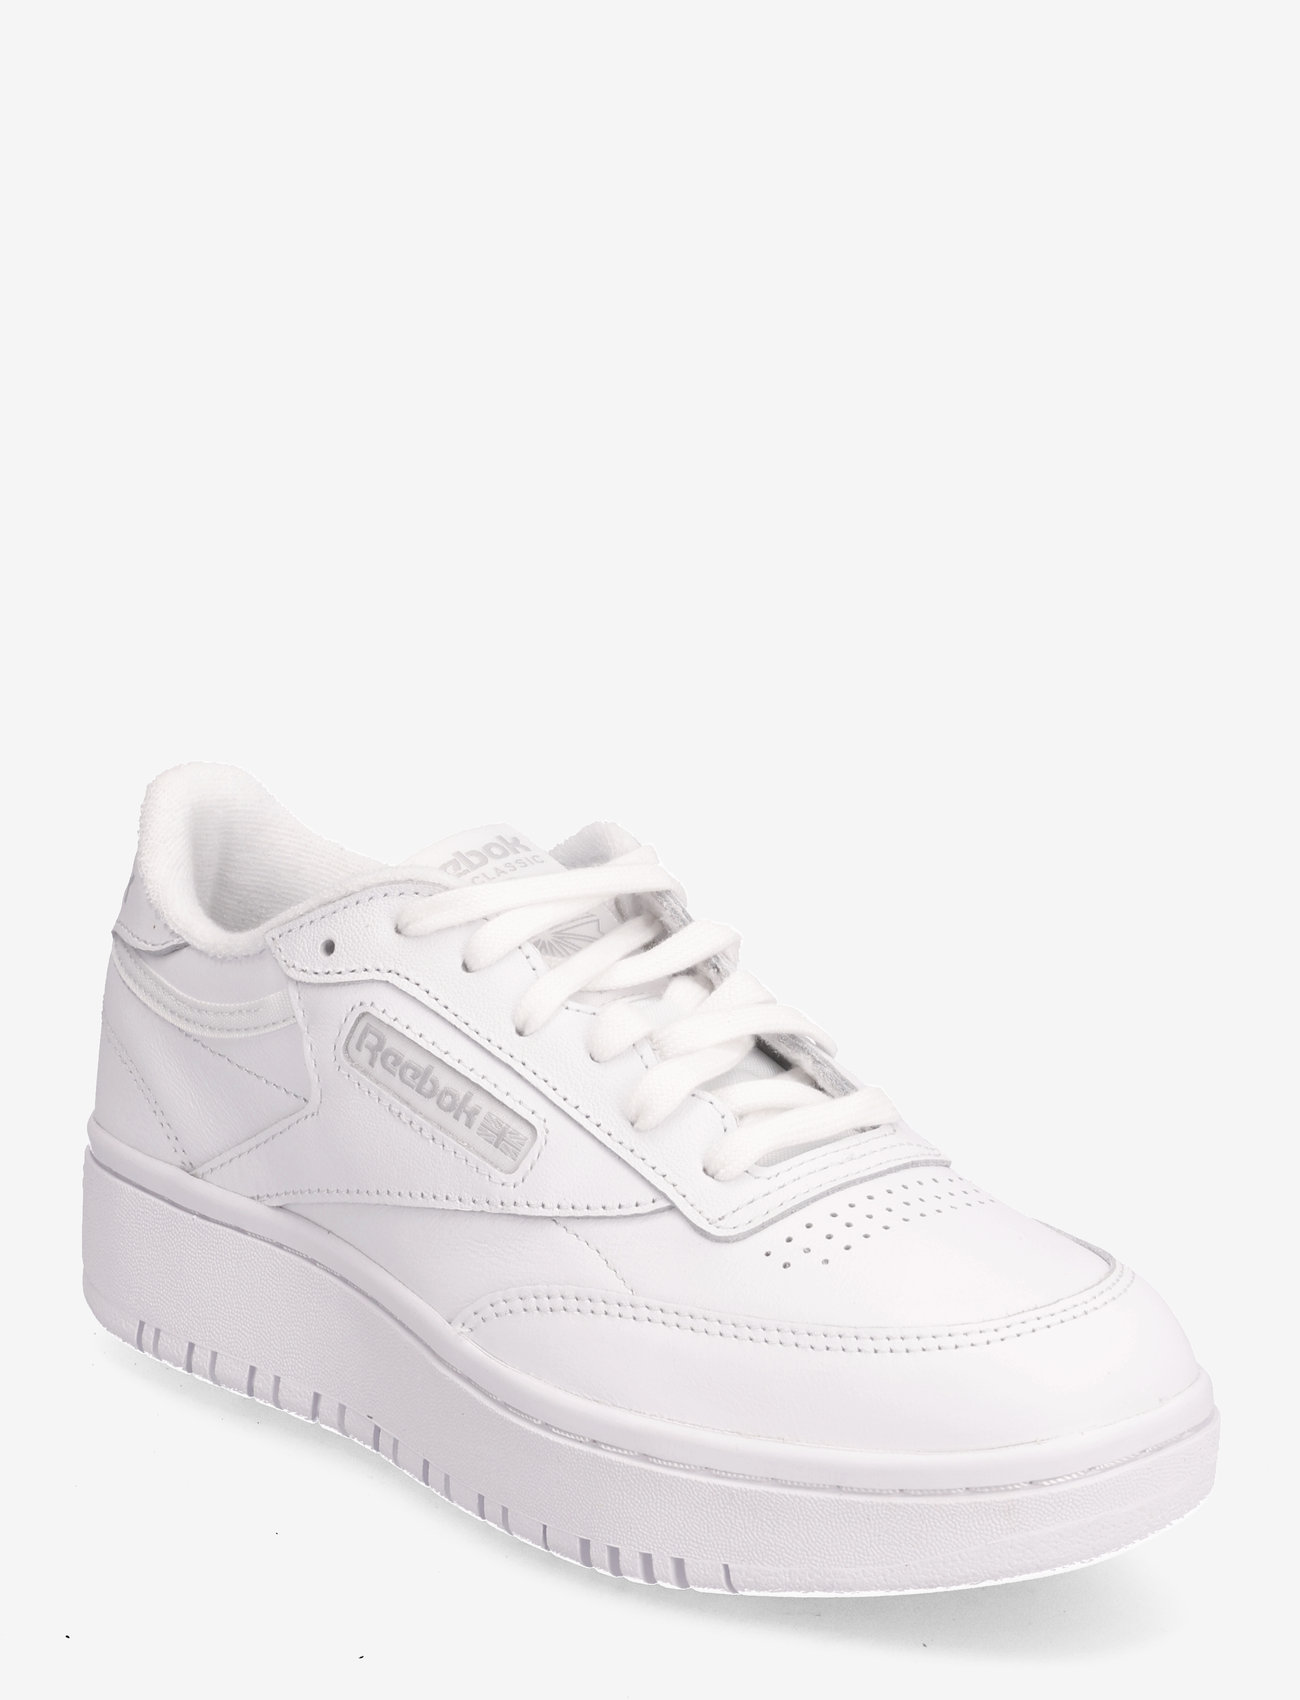 Reebok Classics - CLUB C DOUBLE - low top sneakers - ftwwht/ftwwht/cdgry2 - 0